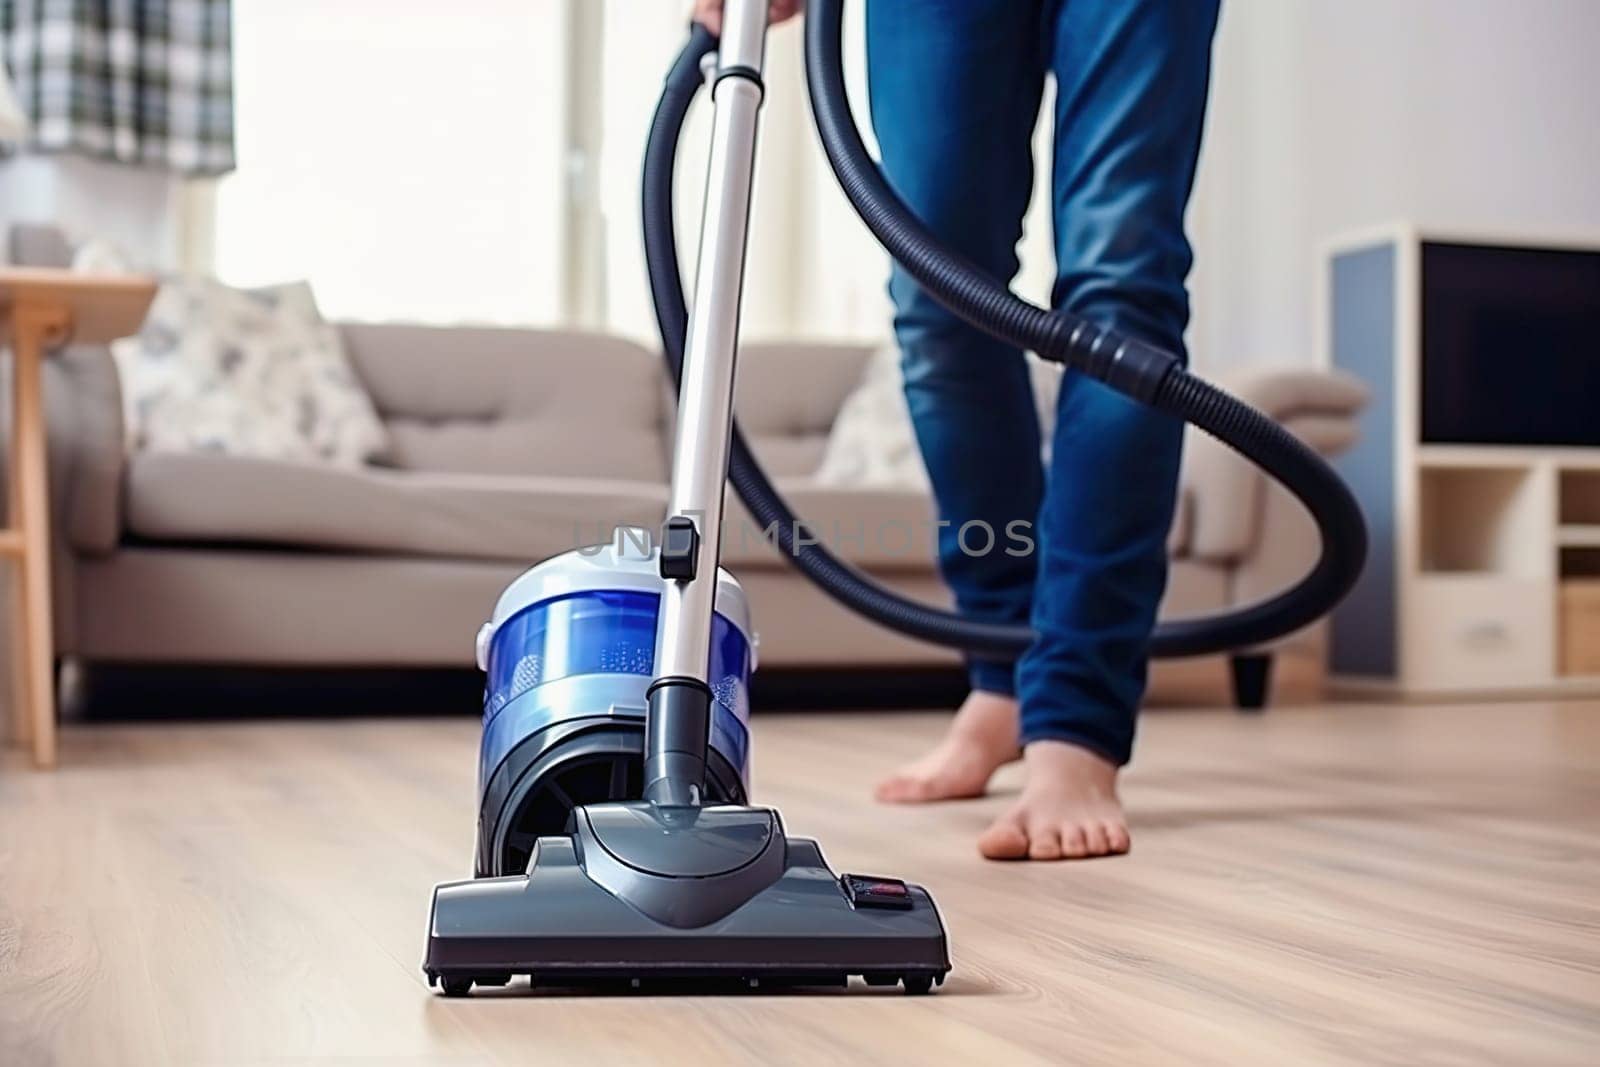 Room cleaning with a vacuum cleaner. Close-up. by Yurich32